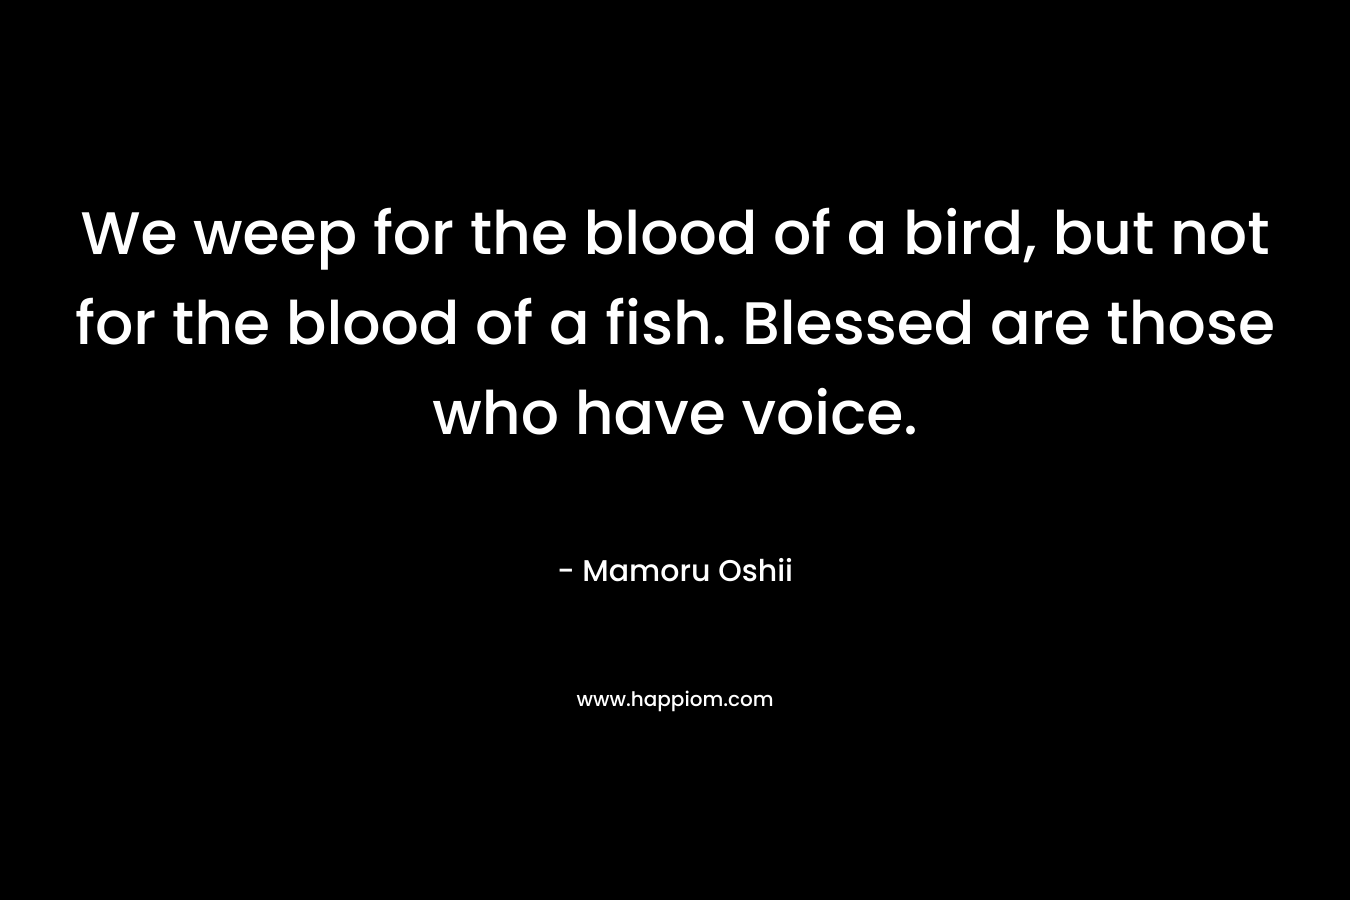 We weep for the blood of a bird, but not for the blood of a fish. Blessed are those who have voice. – Mamoru Oshii